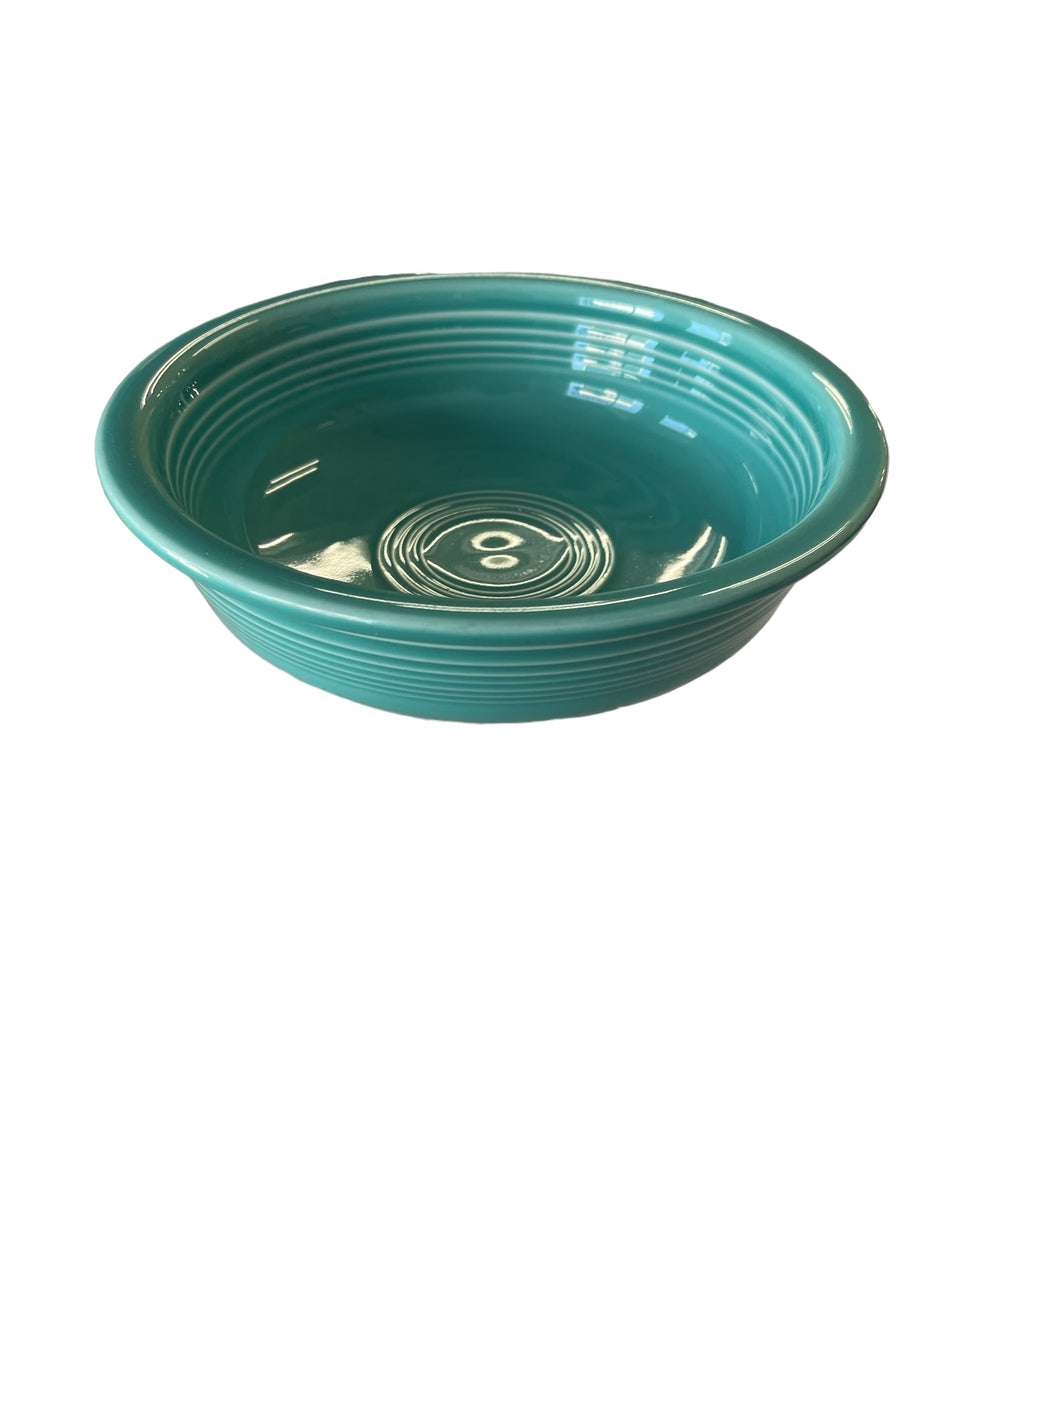 Fiesta Turquoise Cereal Bowl 19 oz 6 7/8